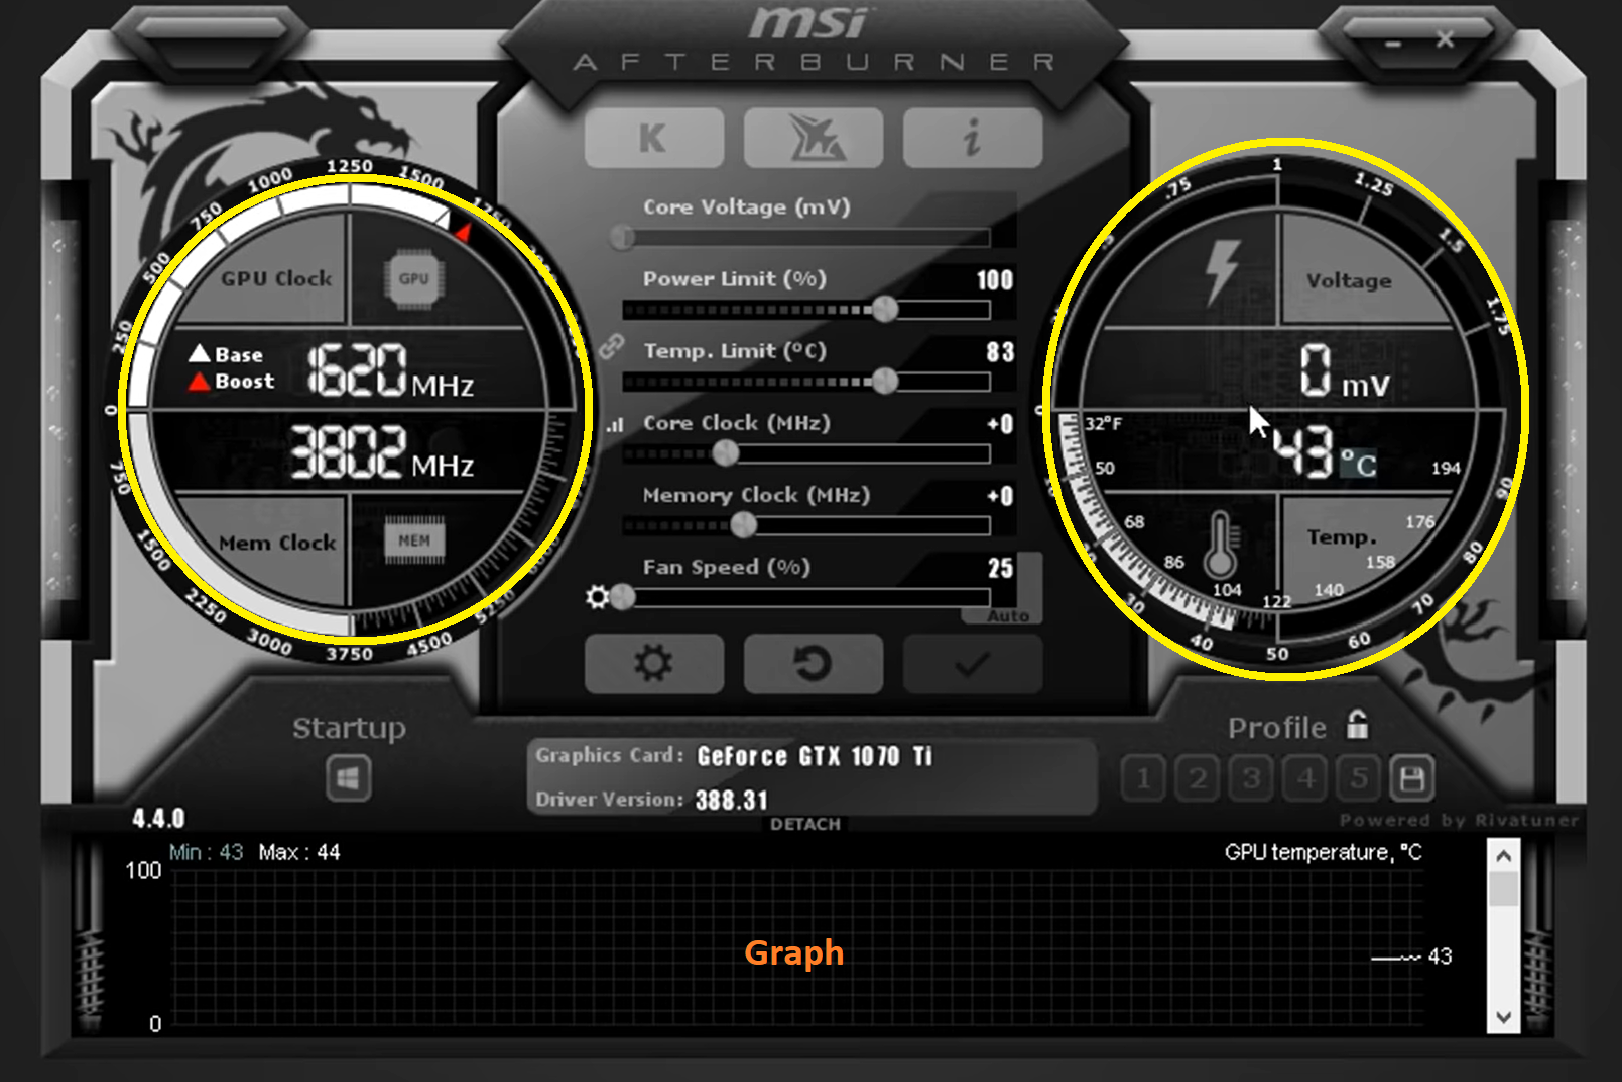 msi afterburner cant change anything